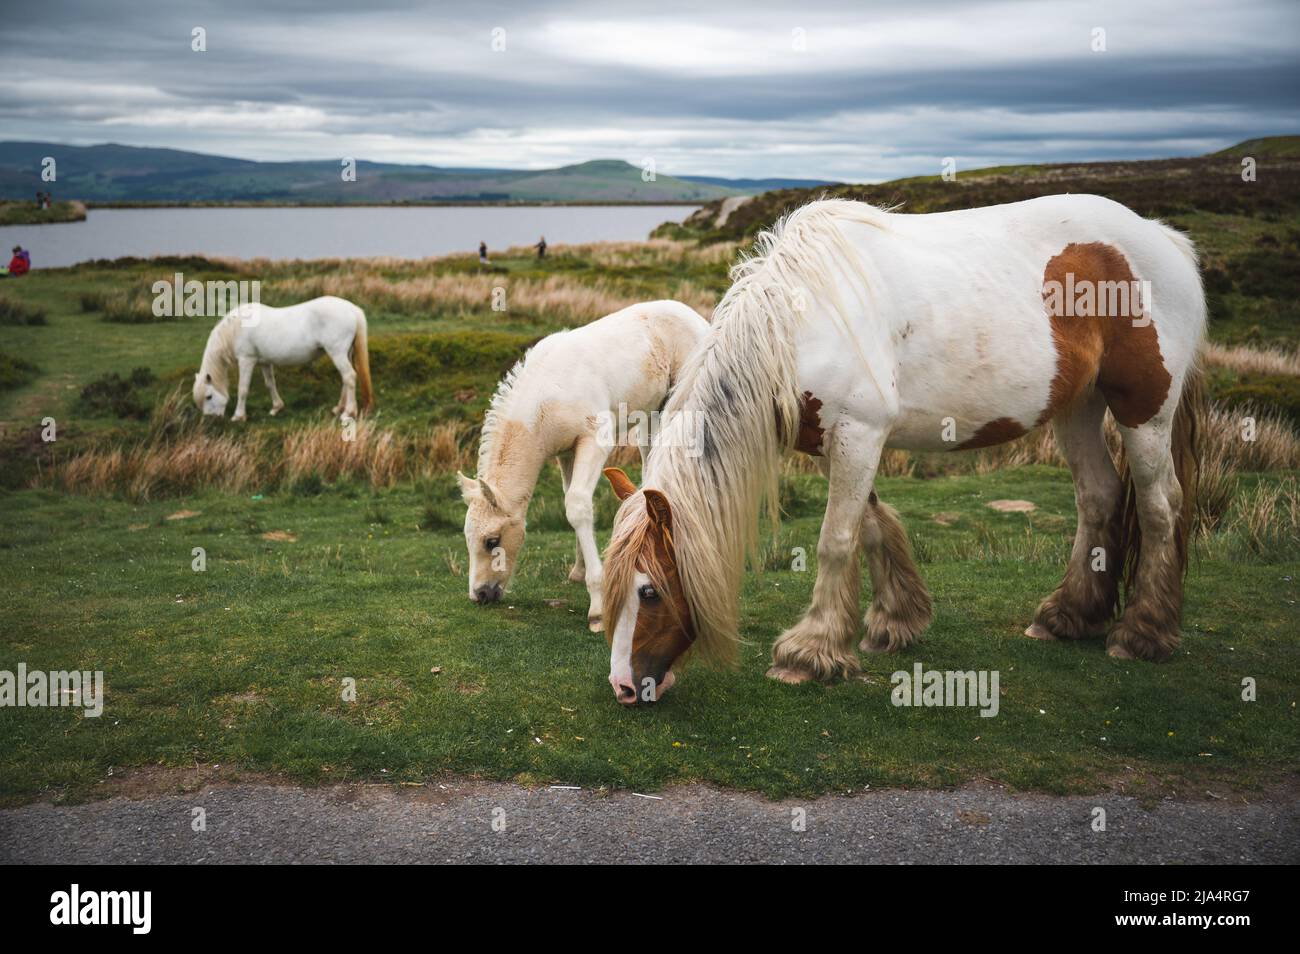 Wild Horses at Keepers Pond in Blaenavon, Brecon Beacons, Galles del Sud Foto Stock